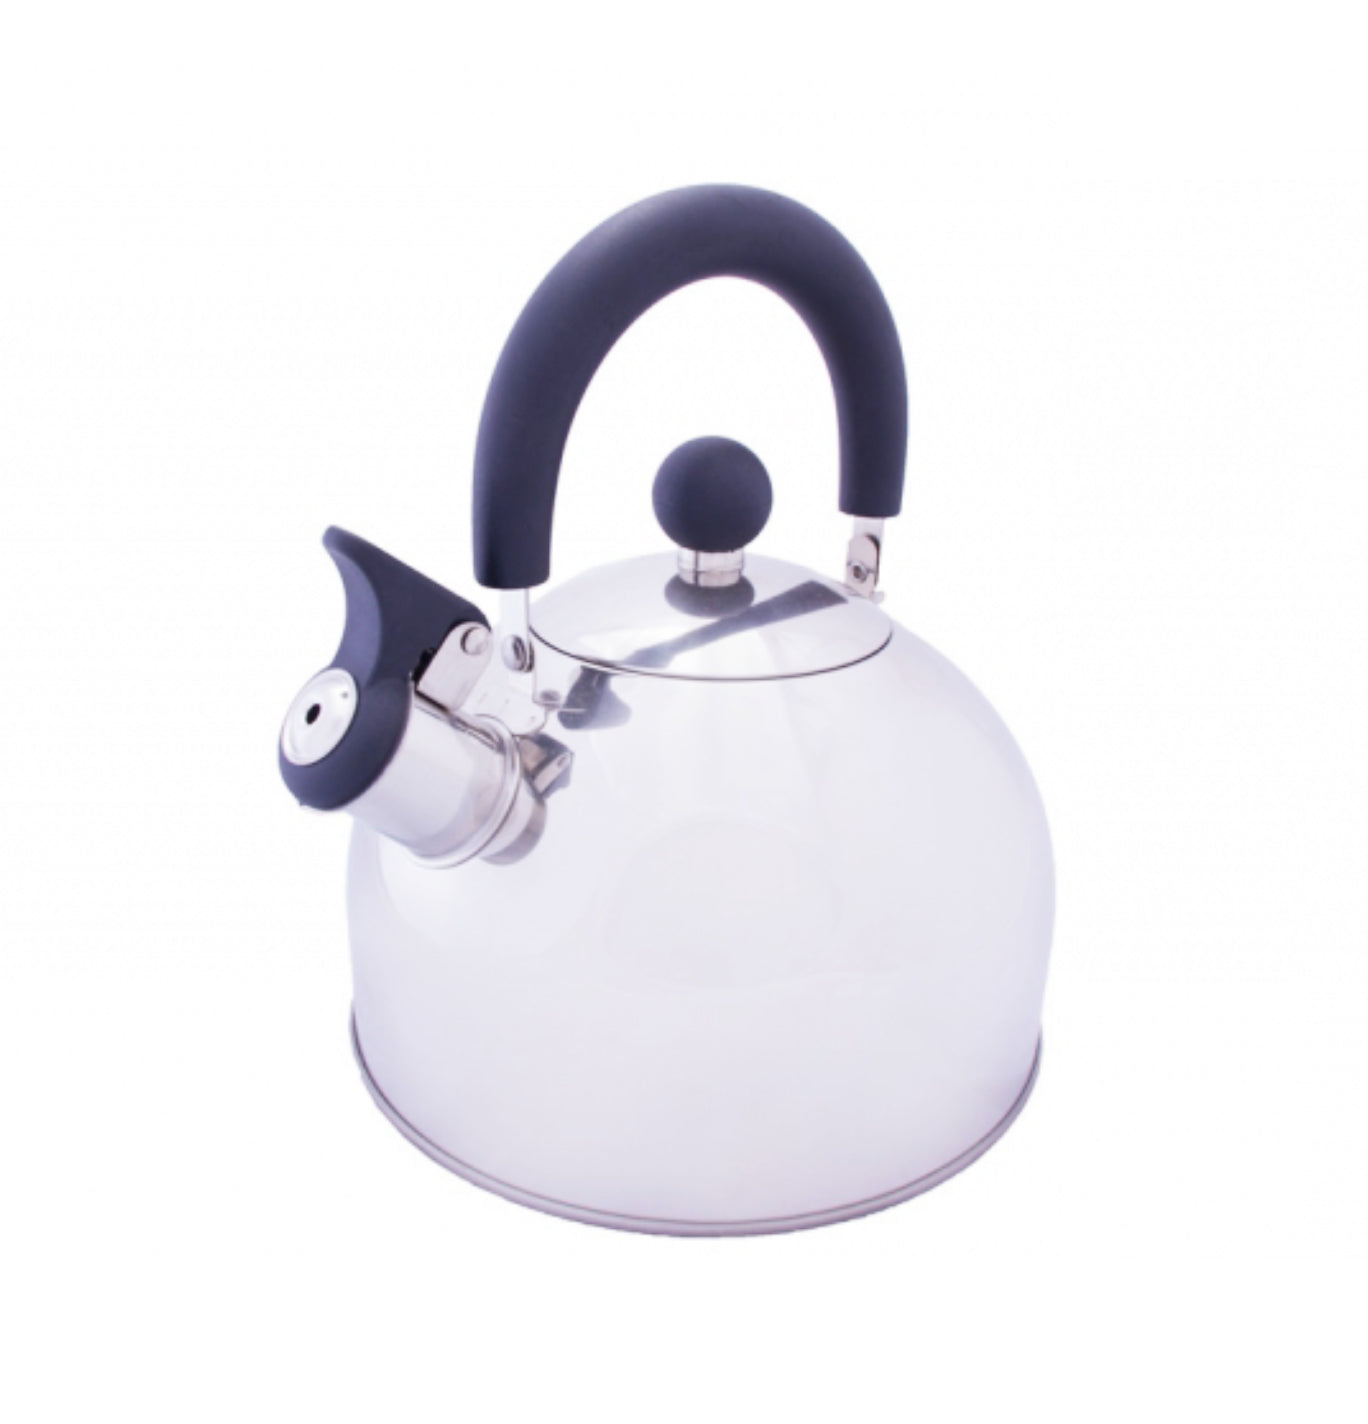 Vango Stainless Steel Gas Kettle | 1.6L Litre Image